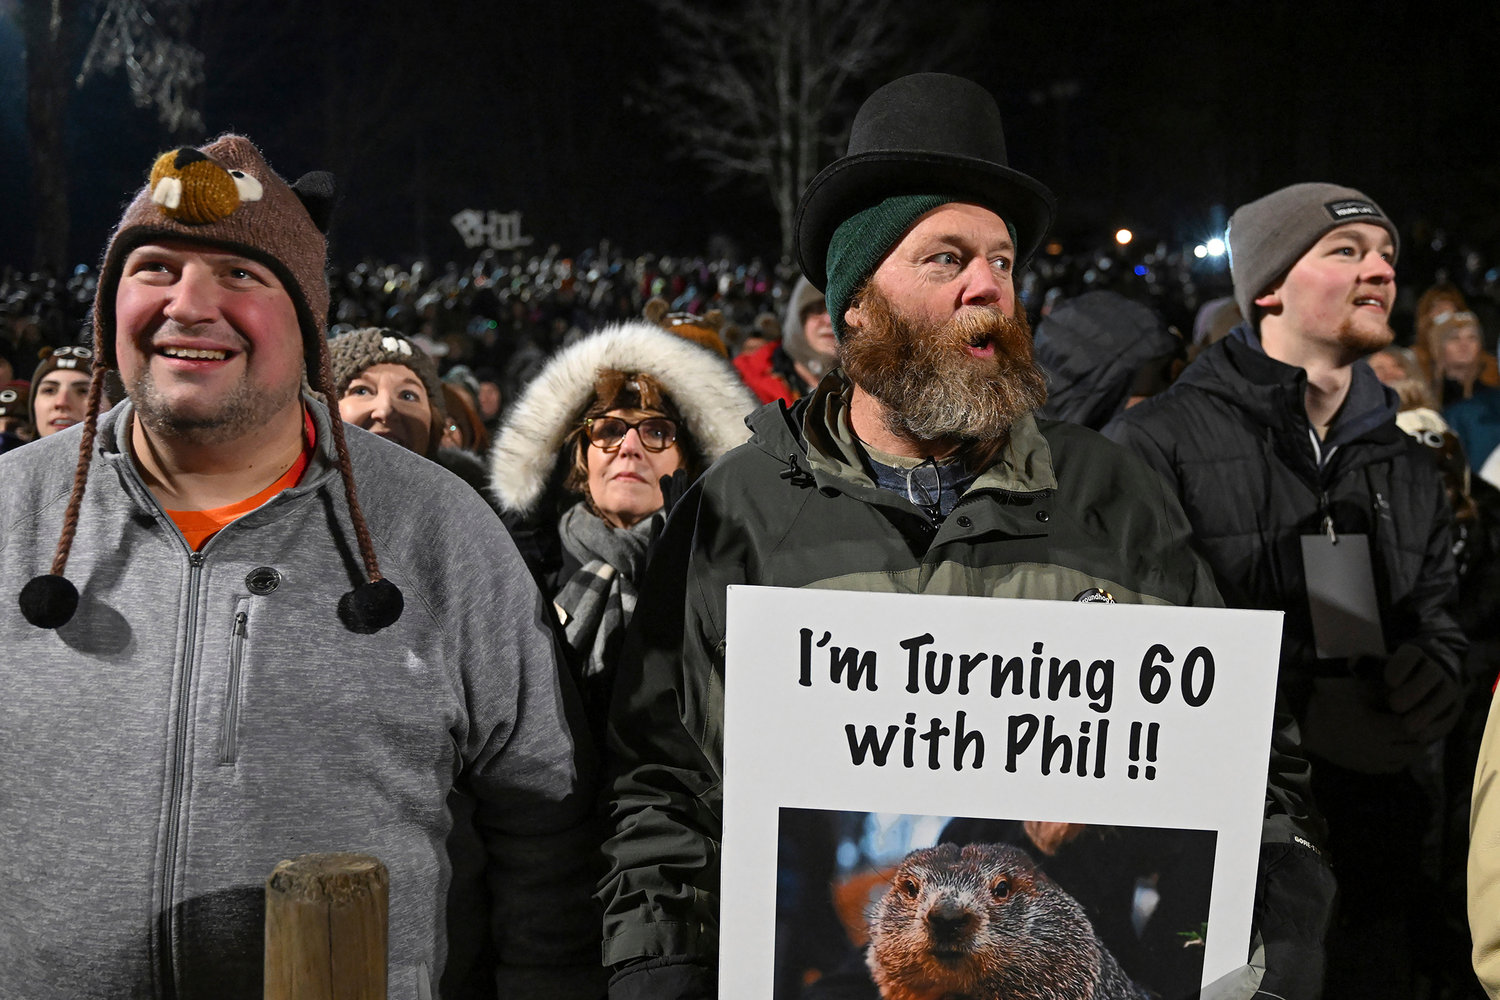 Rory Szwed, left, and Kent Rowan watch the festivities while waiting for Punxsutawney Phil, the weather prognosticating groundhog, to come out and make his prediction during the the 137th celebration of Groundhog Day on Gobbler's Knob in Punxsutawney, Pa., Thursday, Feb. 2, 2023.